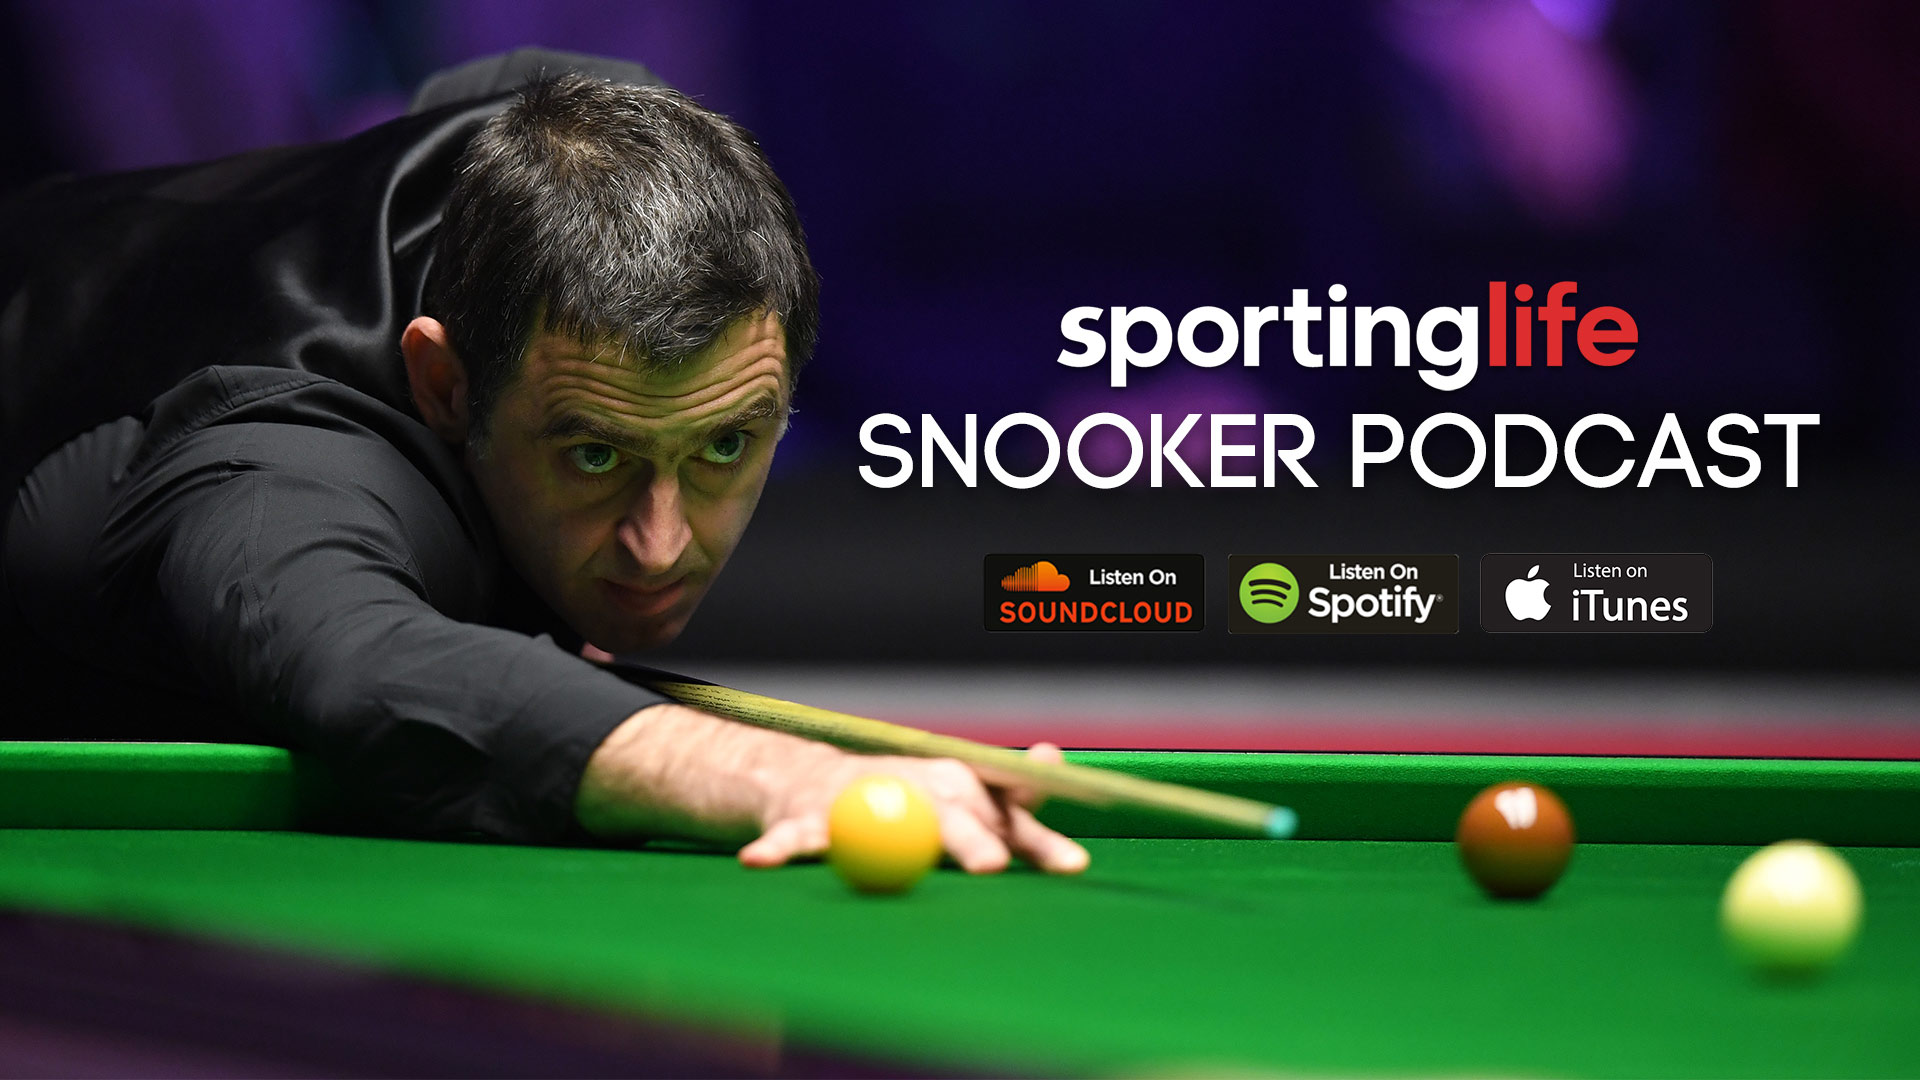 Listen Latest snooker podcast including Ronnie OSullivan discussion